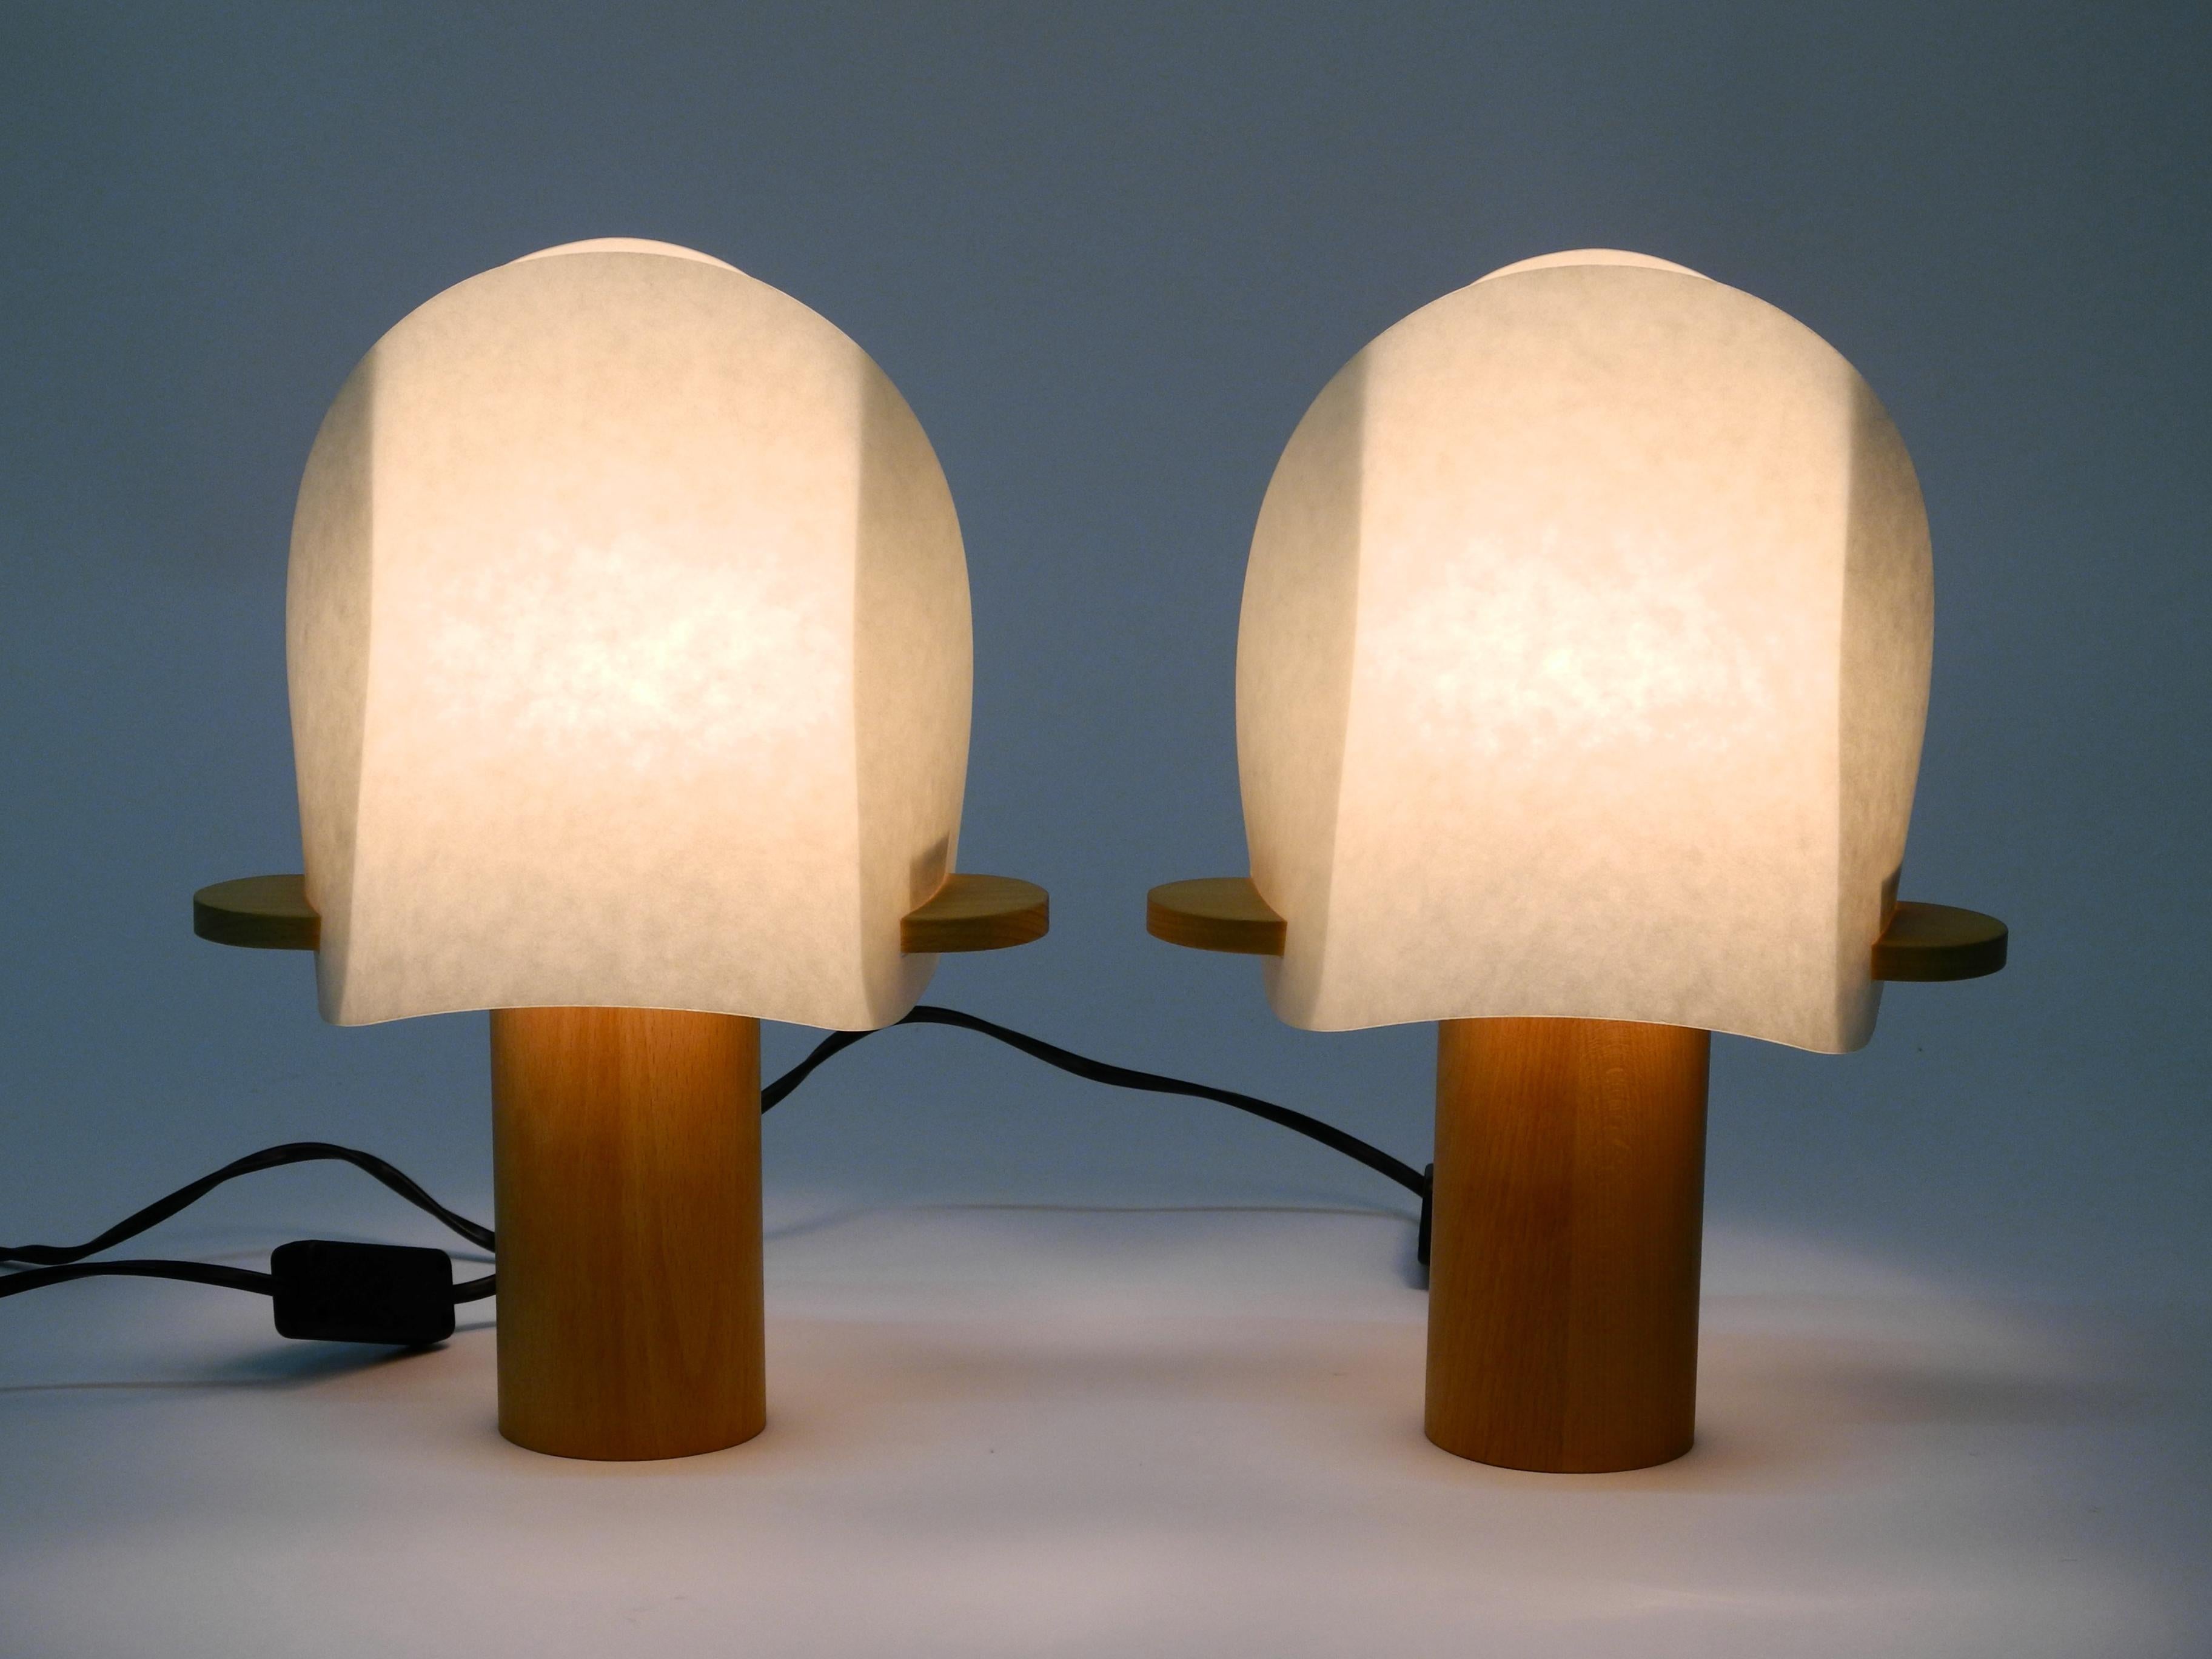 Two Charming Minimalistic Oak Table Lamps with Lunopal Shades by Domus  1980s In Good Condition For Sale In München, DE